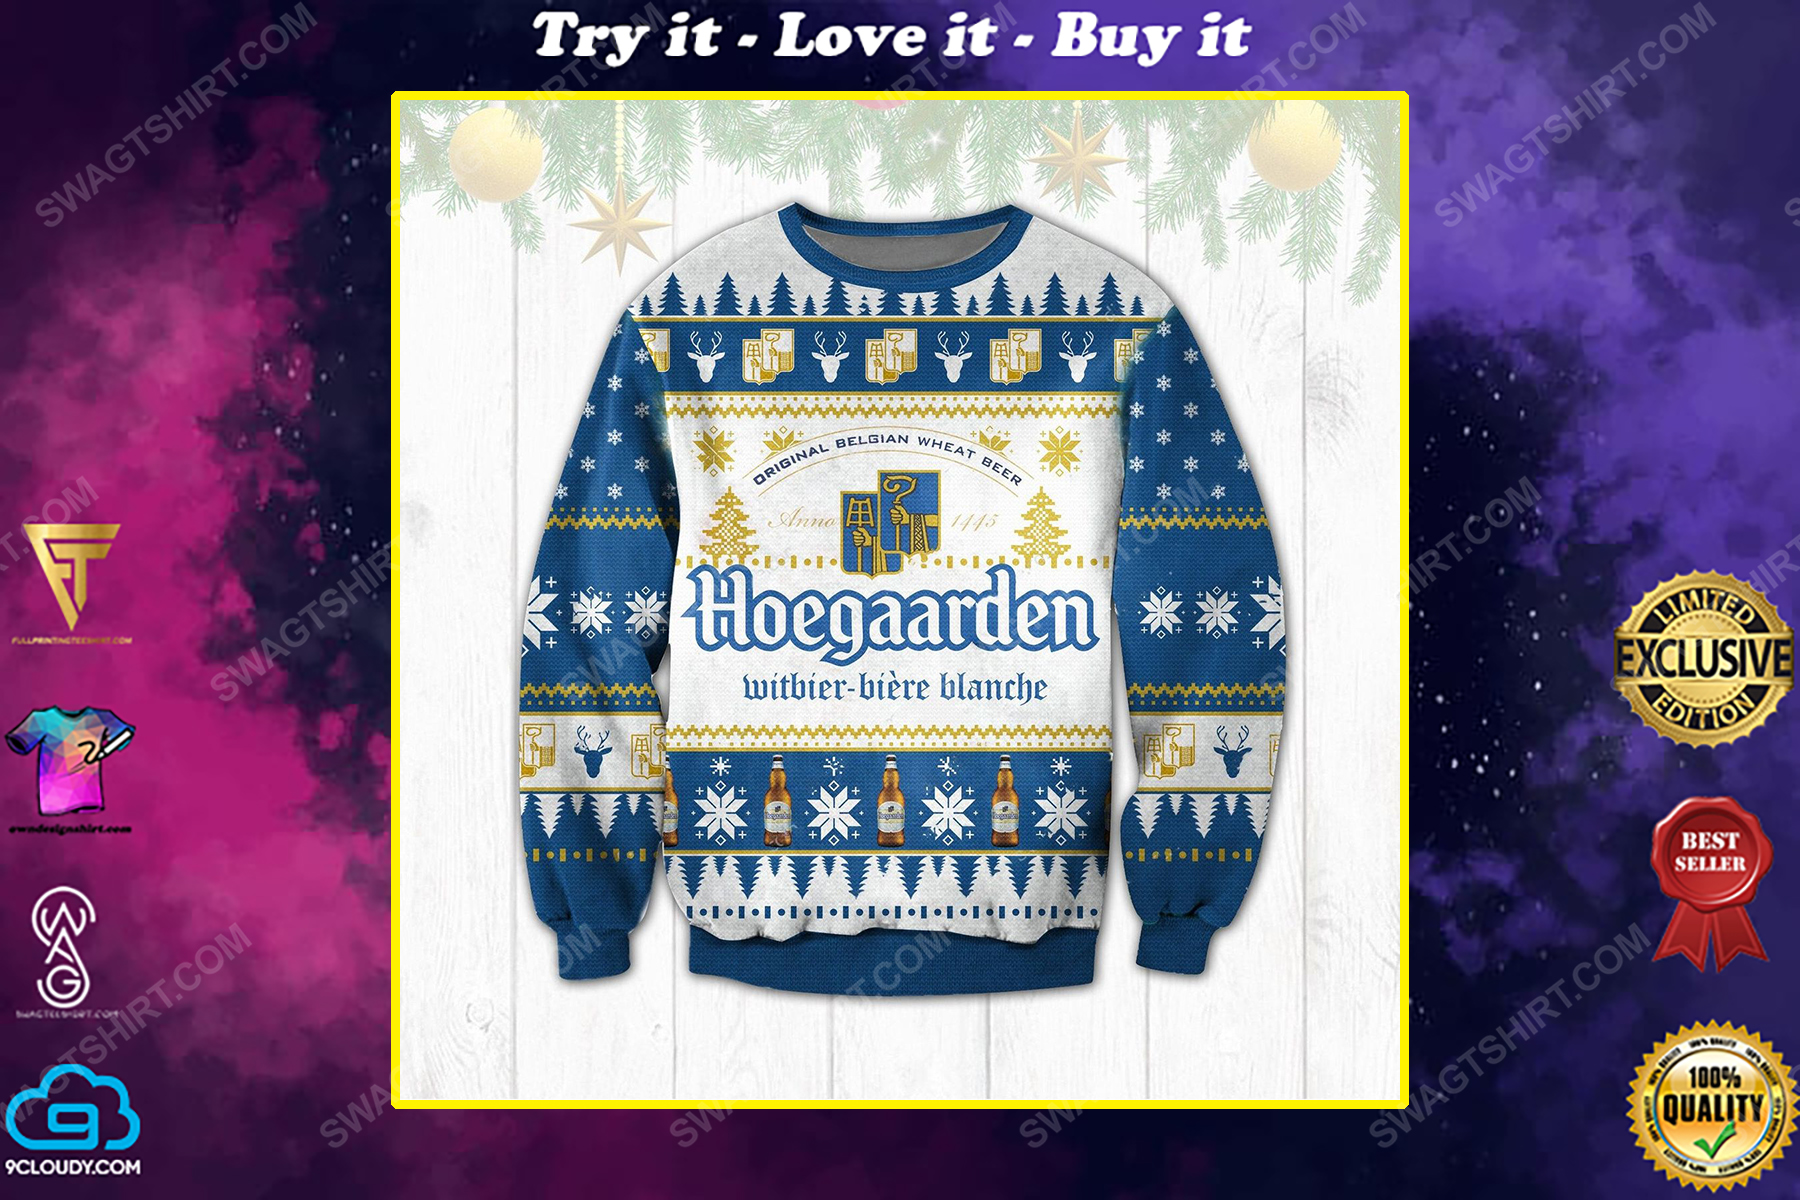 Hoegaarden witbie biere blanche ugly christmas sweater